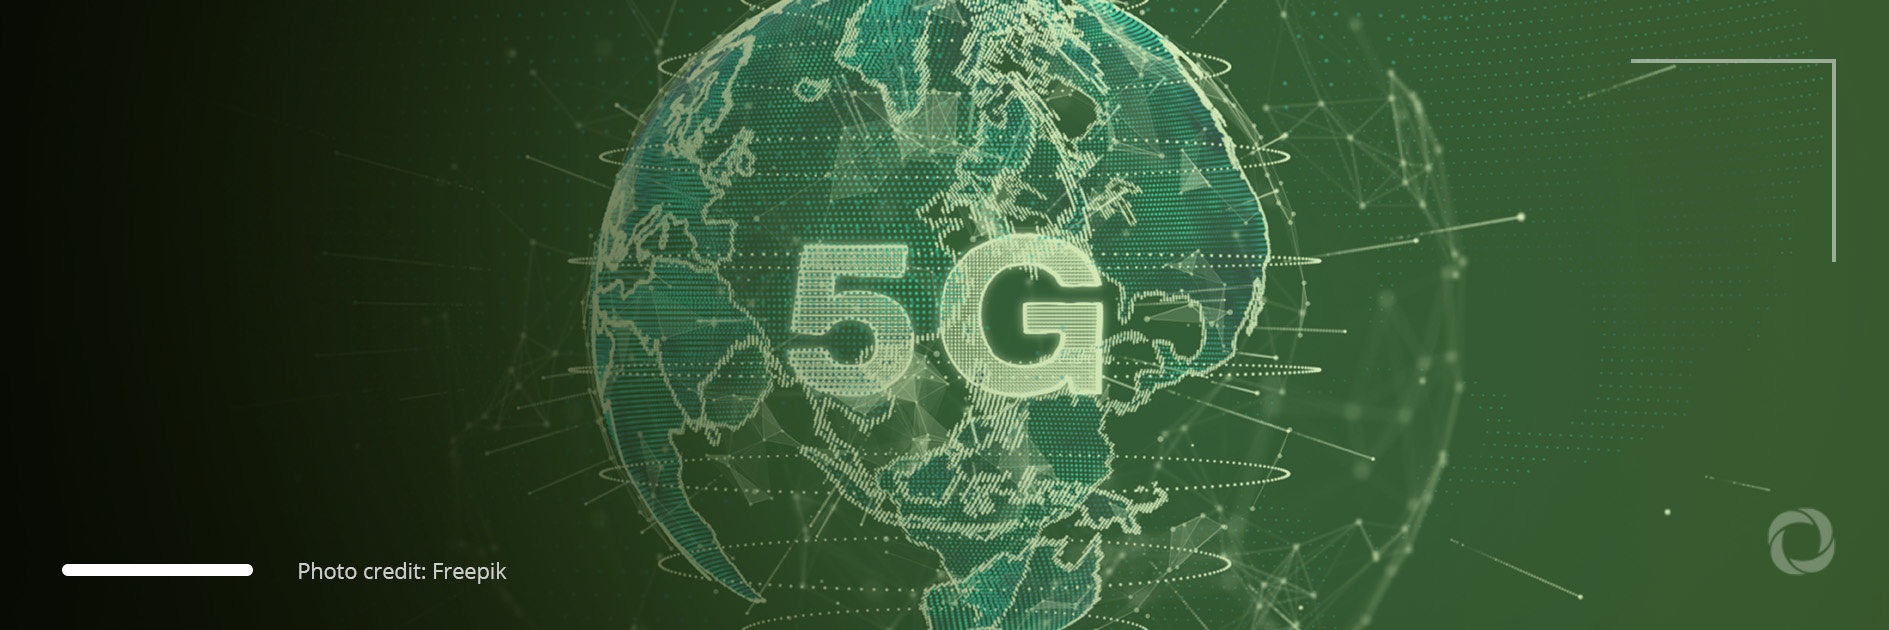 Latin America is racing to implement 5G but millions remain unconnected